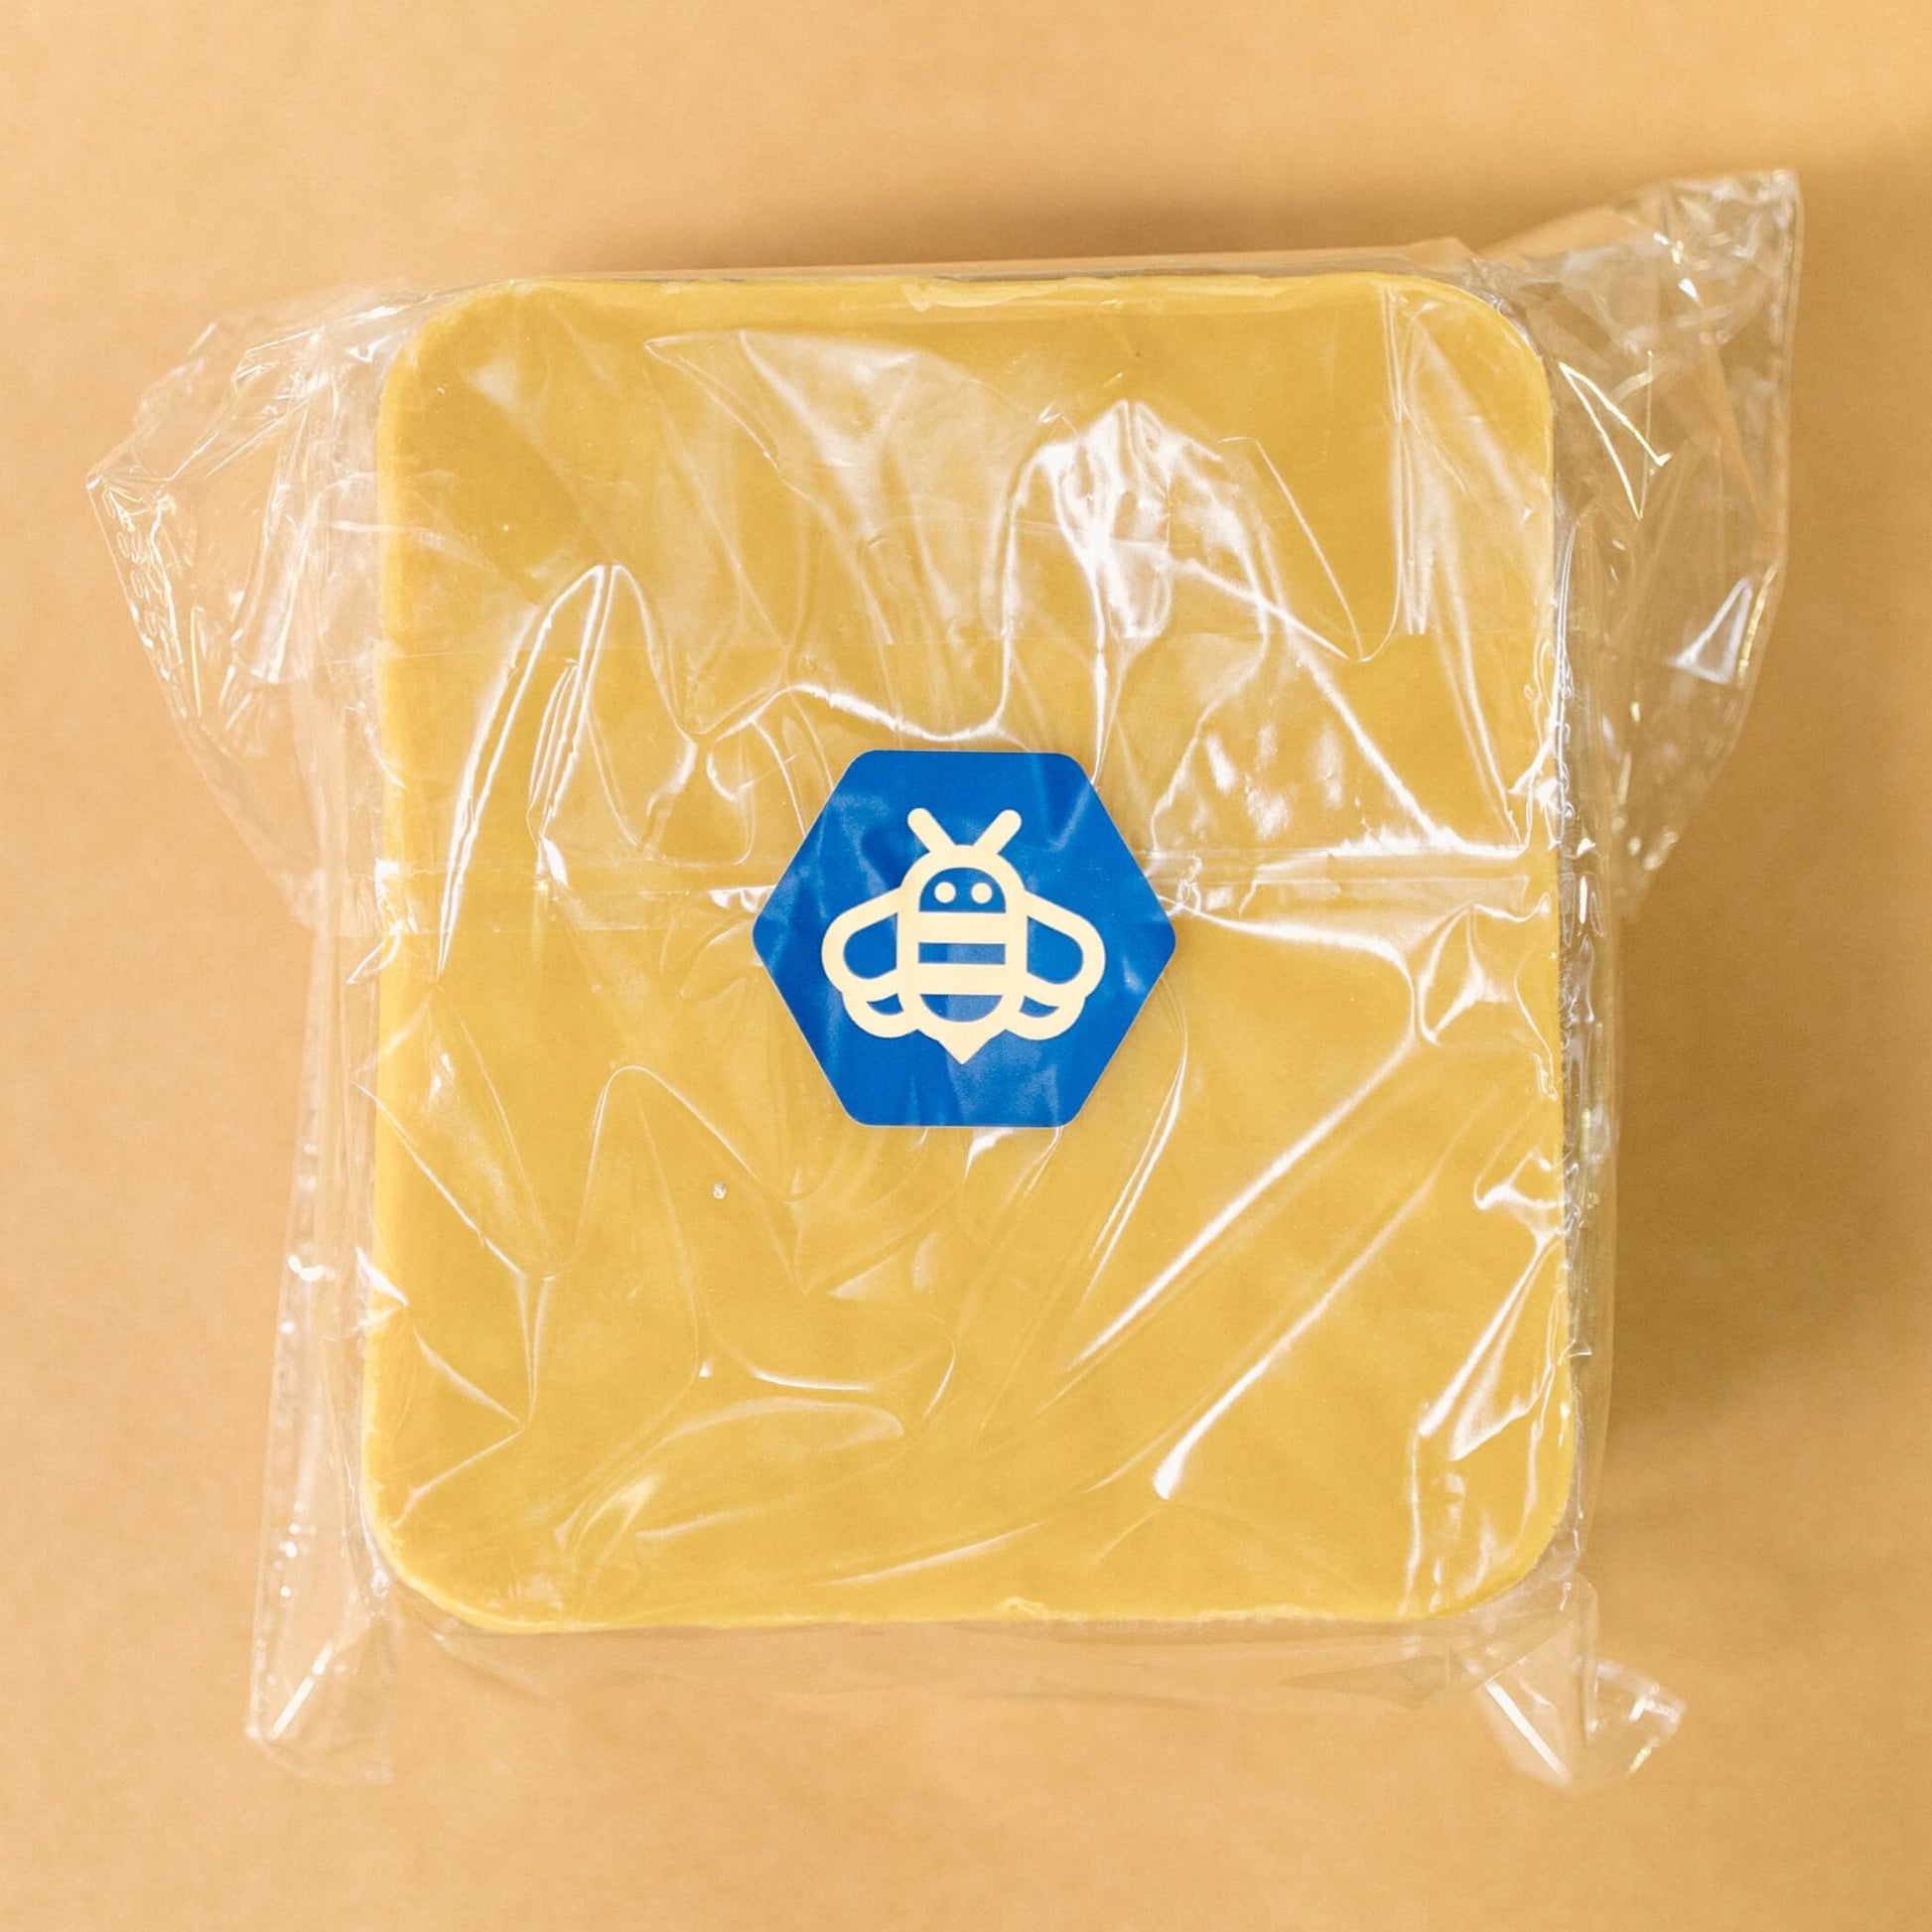 Yellow 1 lb Beeswax Blocks For Sale